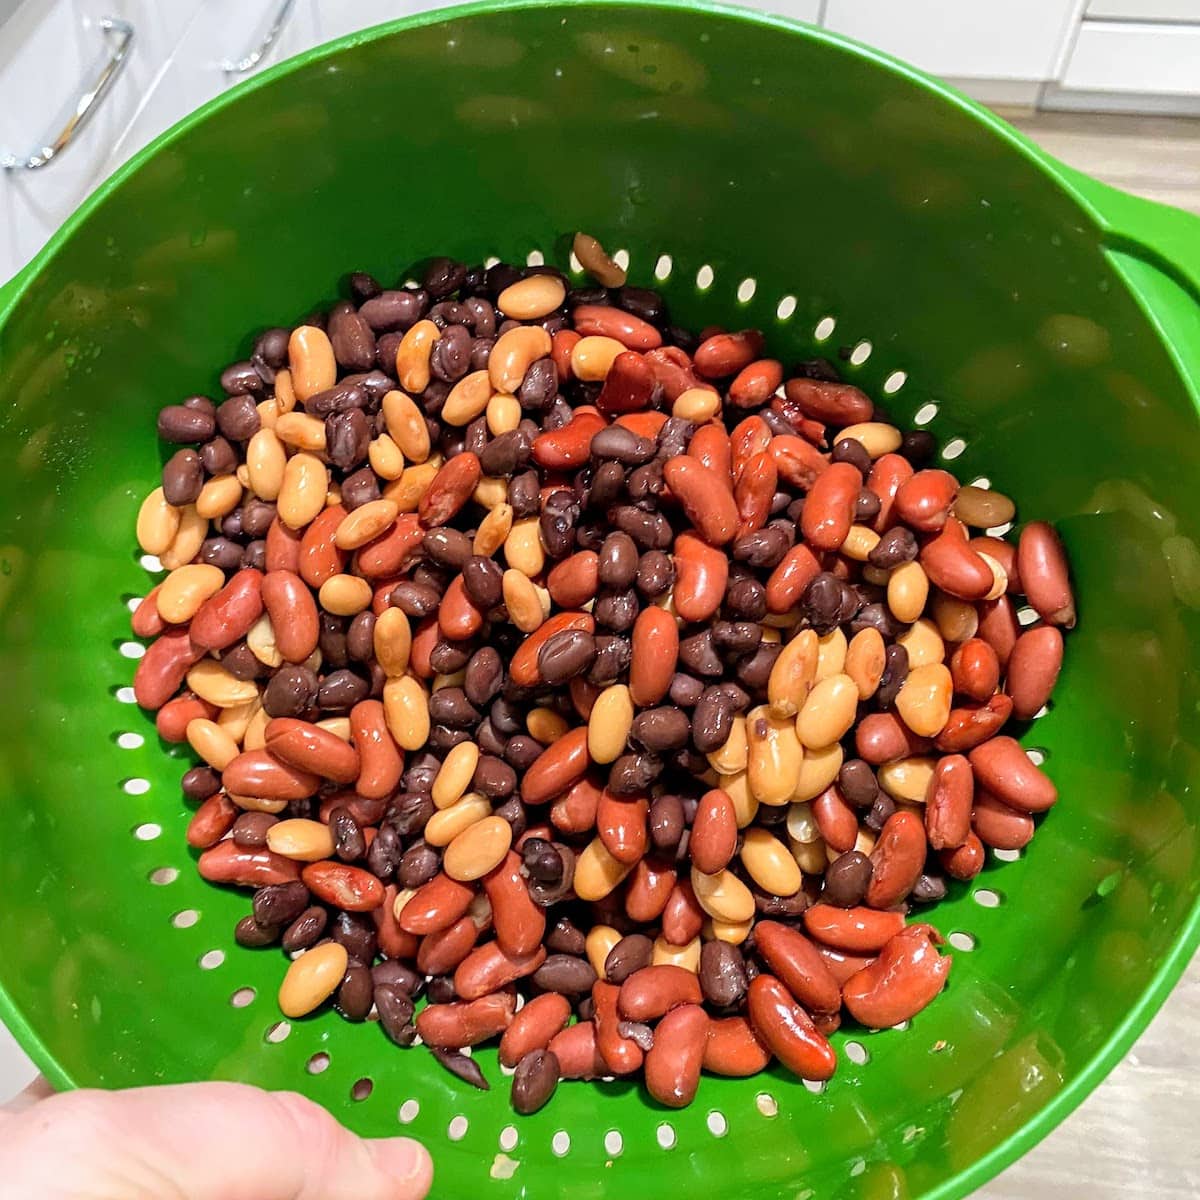 three kinds of beans in a bright green colander